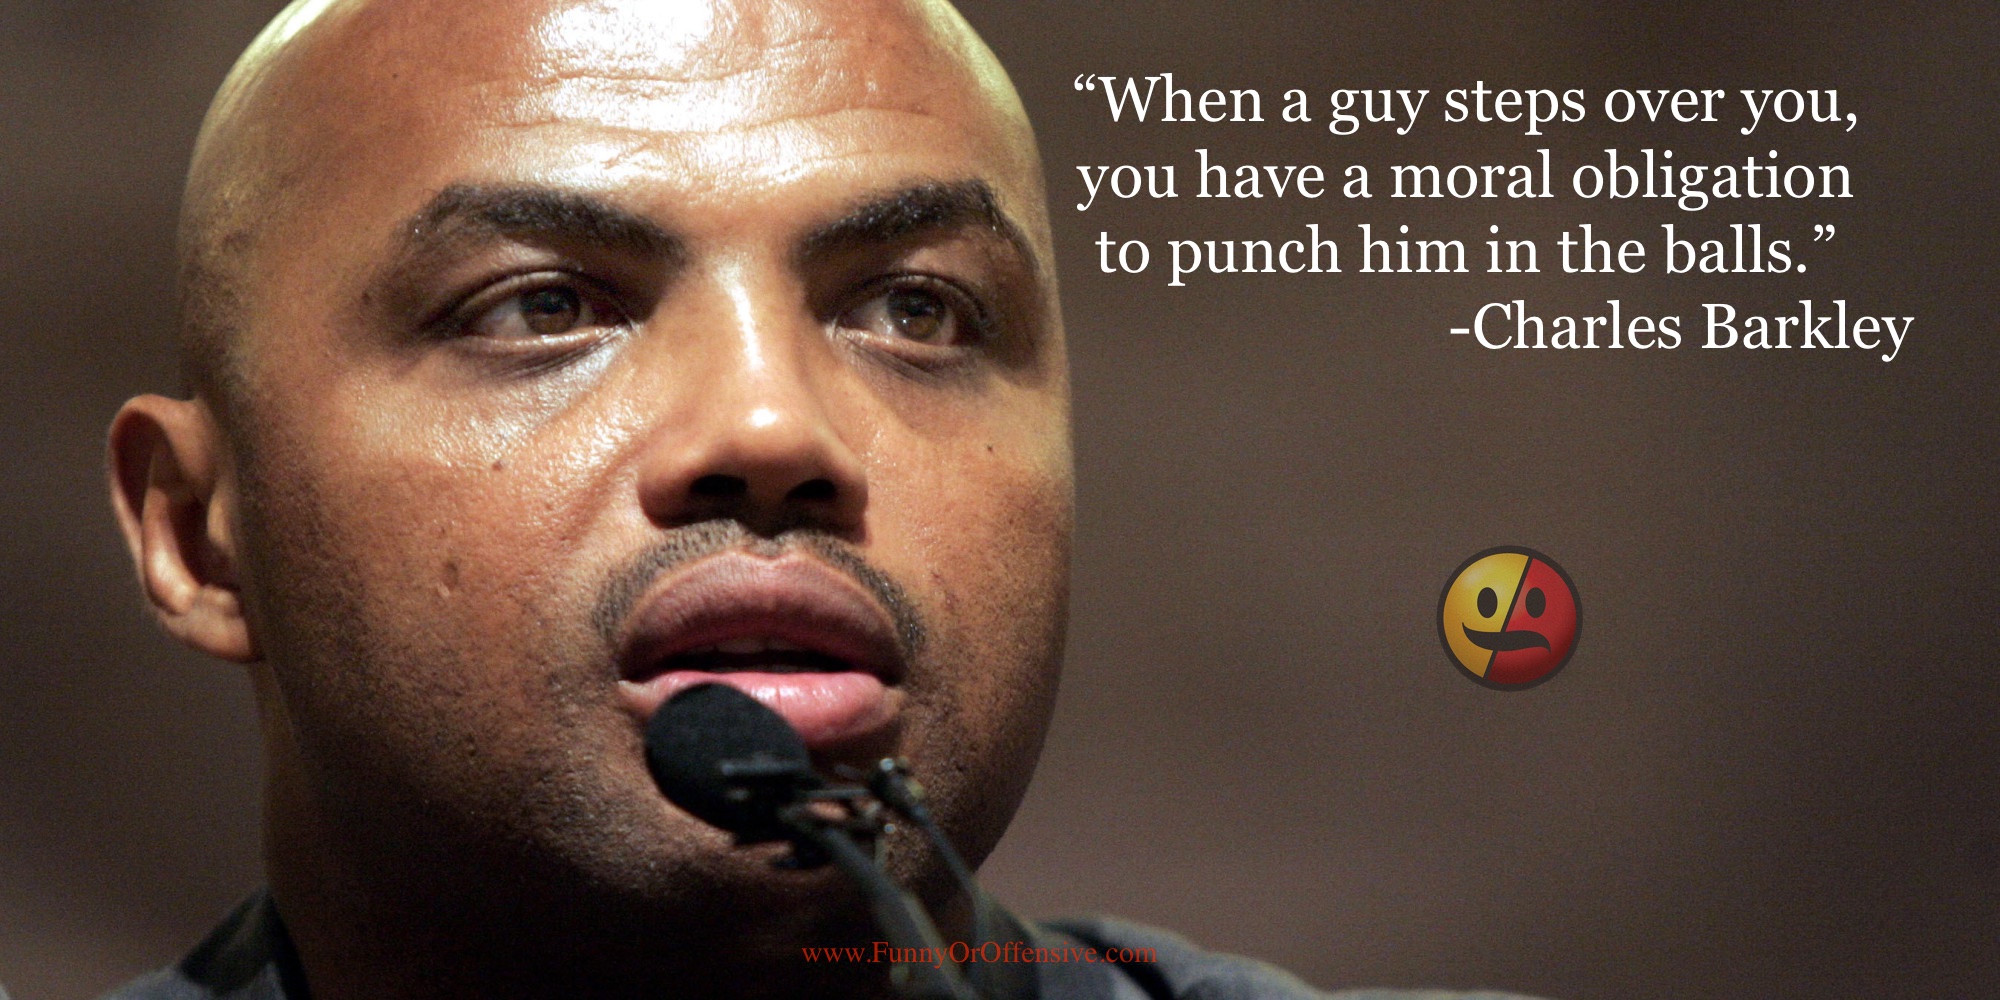 Charles Barkley "Punch Him in the Balls"